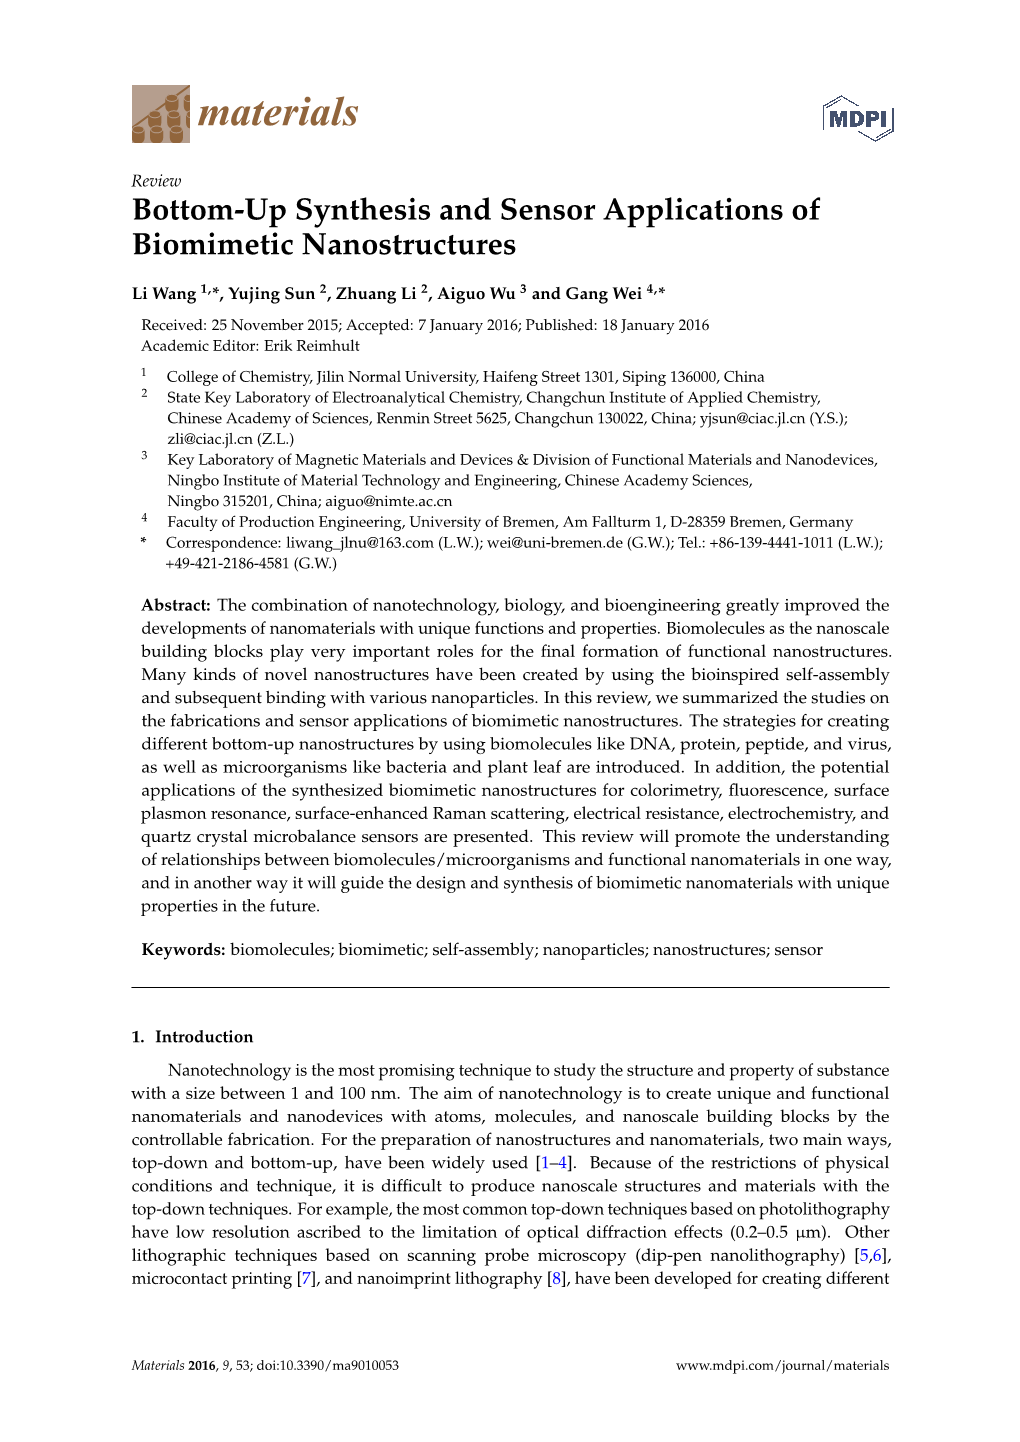 Bottom-Up Synthesis and Sensor Applications of Biomimetic Nanostructures